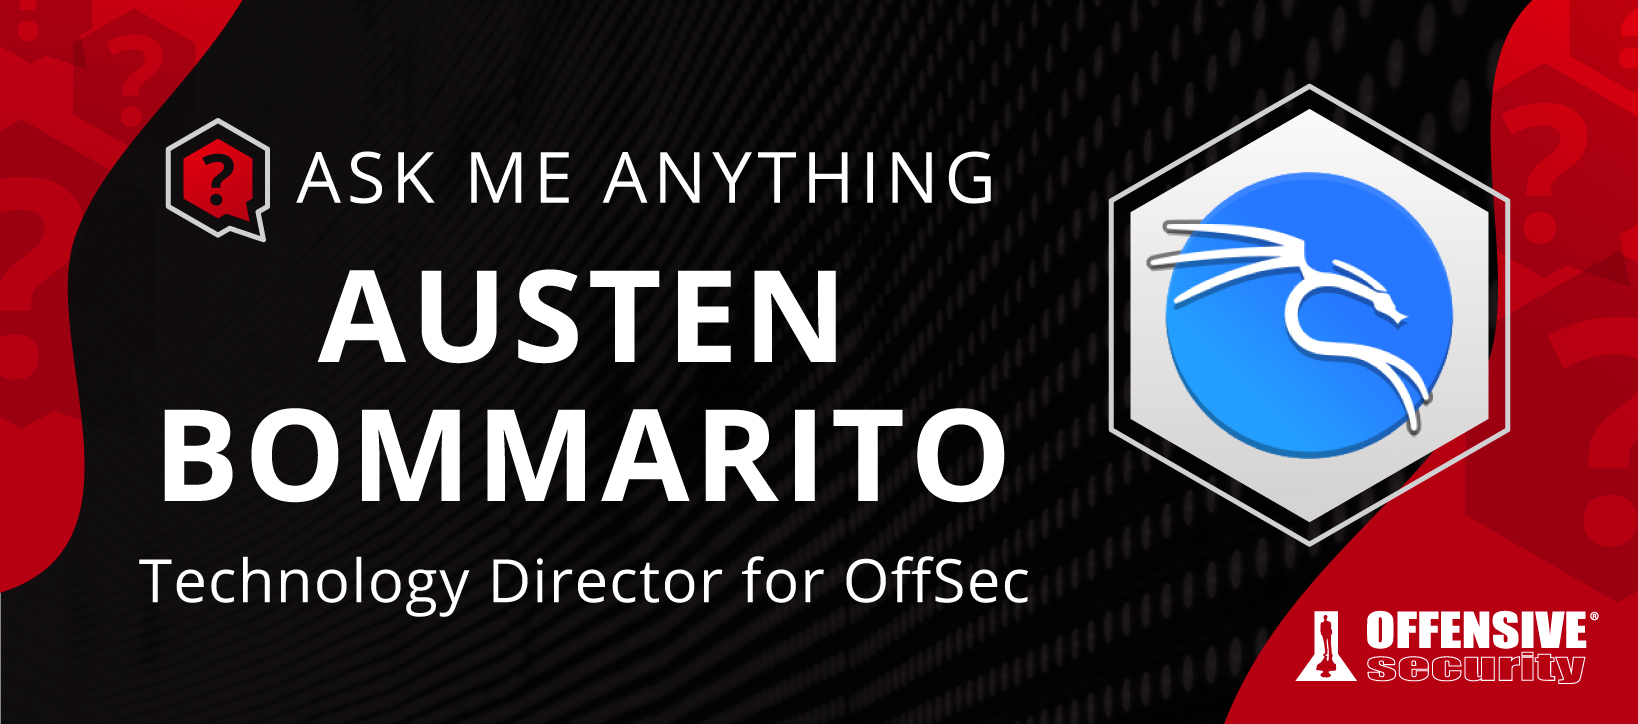 AMA Webinar: Behind The Curtain of OffSec's Industry-Leading Labs